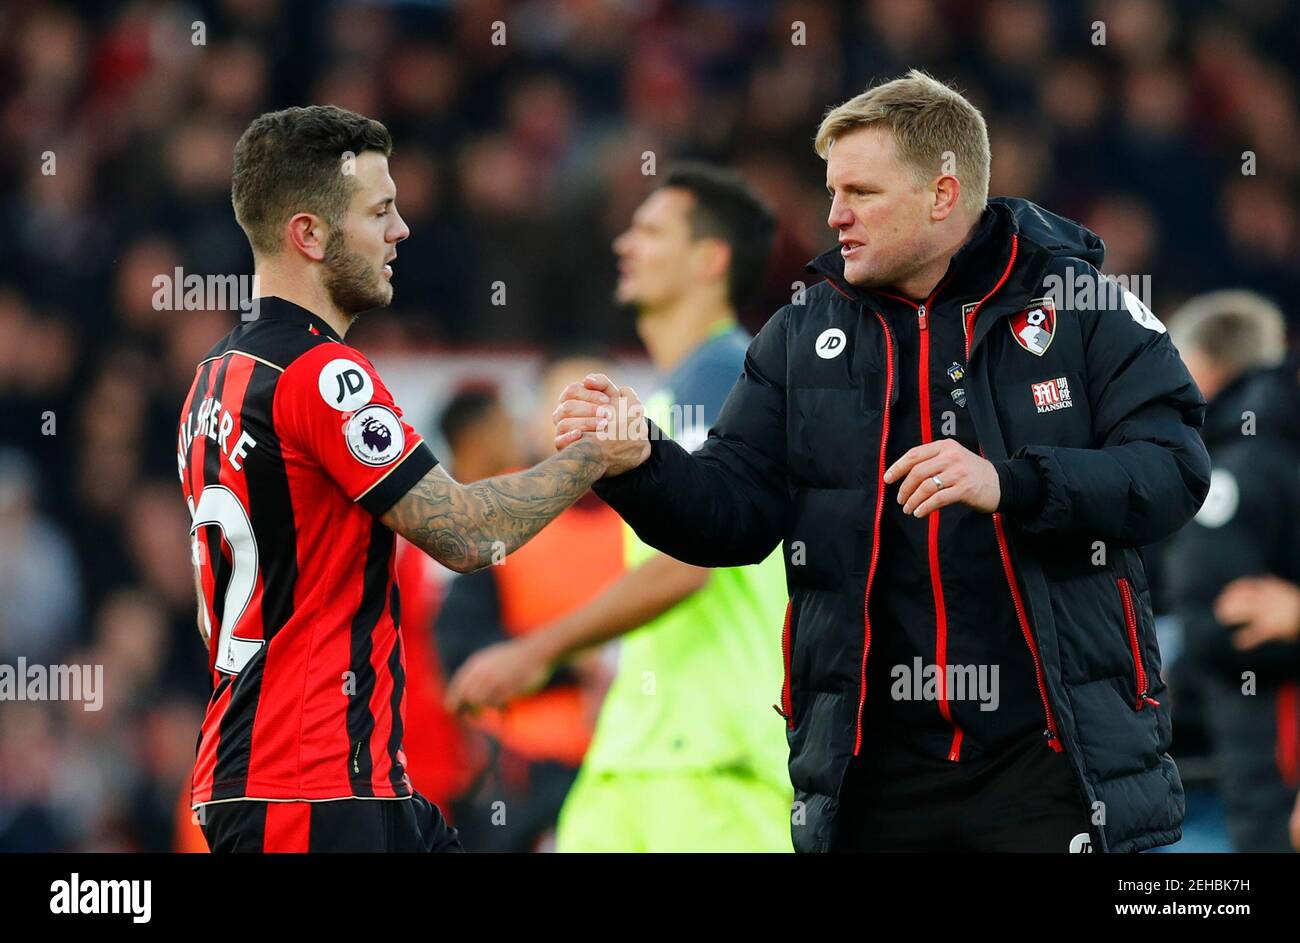 Football Soccer Britain - AFC Bournemouth v Liverpool - Premier League - Vitality Stadium - 4/12/16 Bournemouth manager Eddie Howe shakes hands with Jack Wilshere  after the game  Reuters / Eddie Keogh Livepic EDITORIAL USE ONLY. No use with unauthorized audio, video, data, fixture lists, club/league logos or 'live' services. Online in-match use limited to 45 images, no video emulation. No use in betting, games or single club/league/player publications. Please contact your account representative for further details. Stock Photo